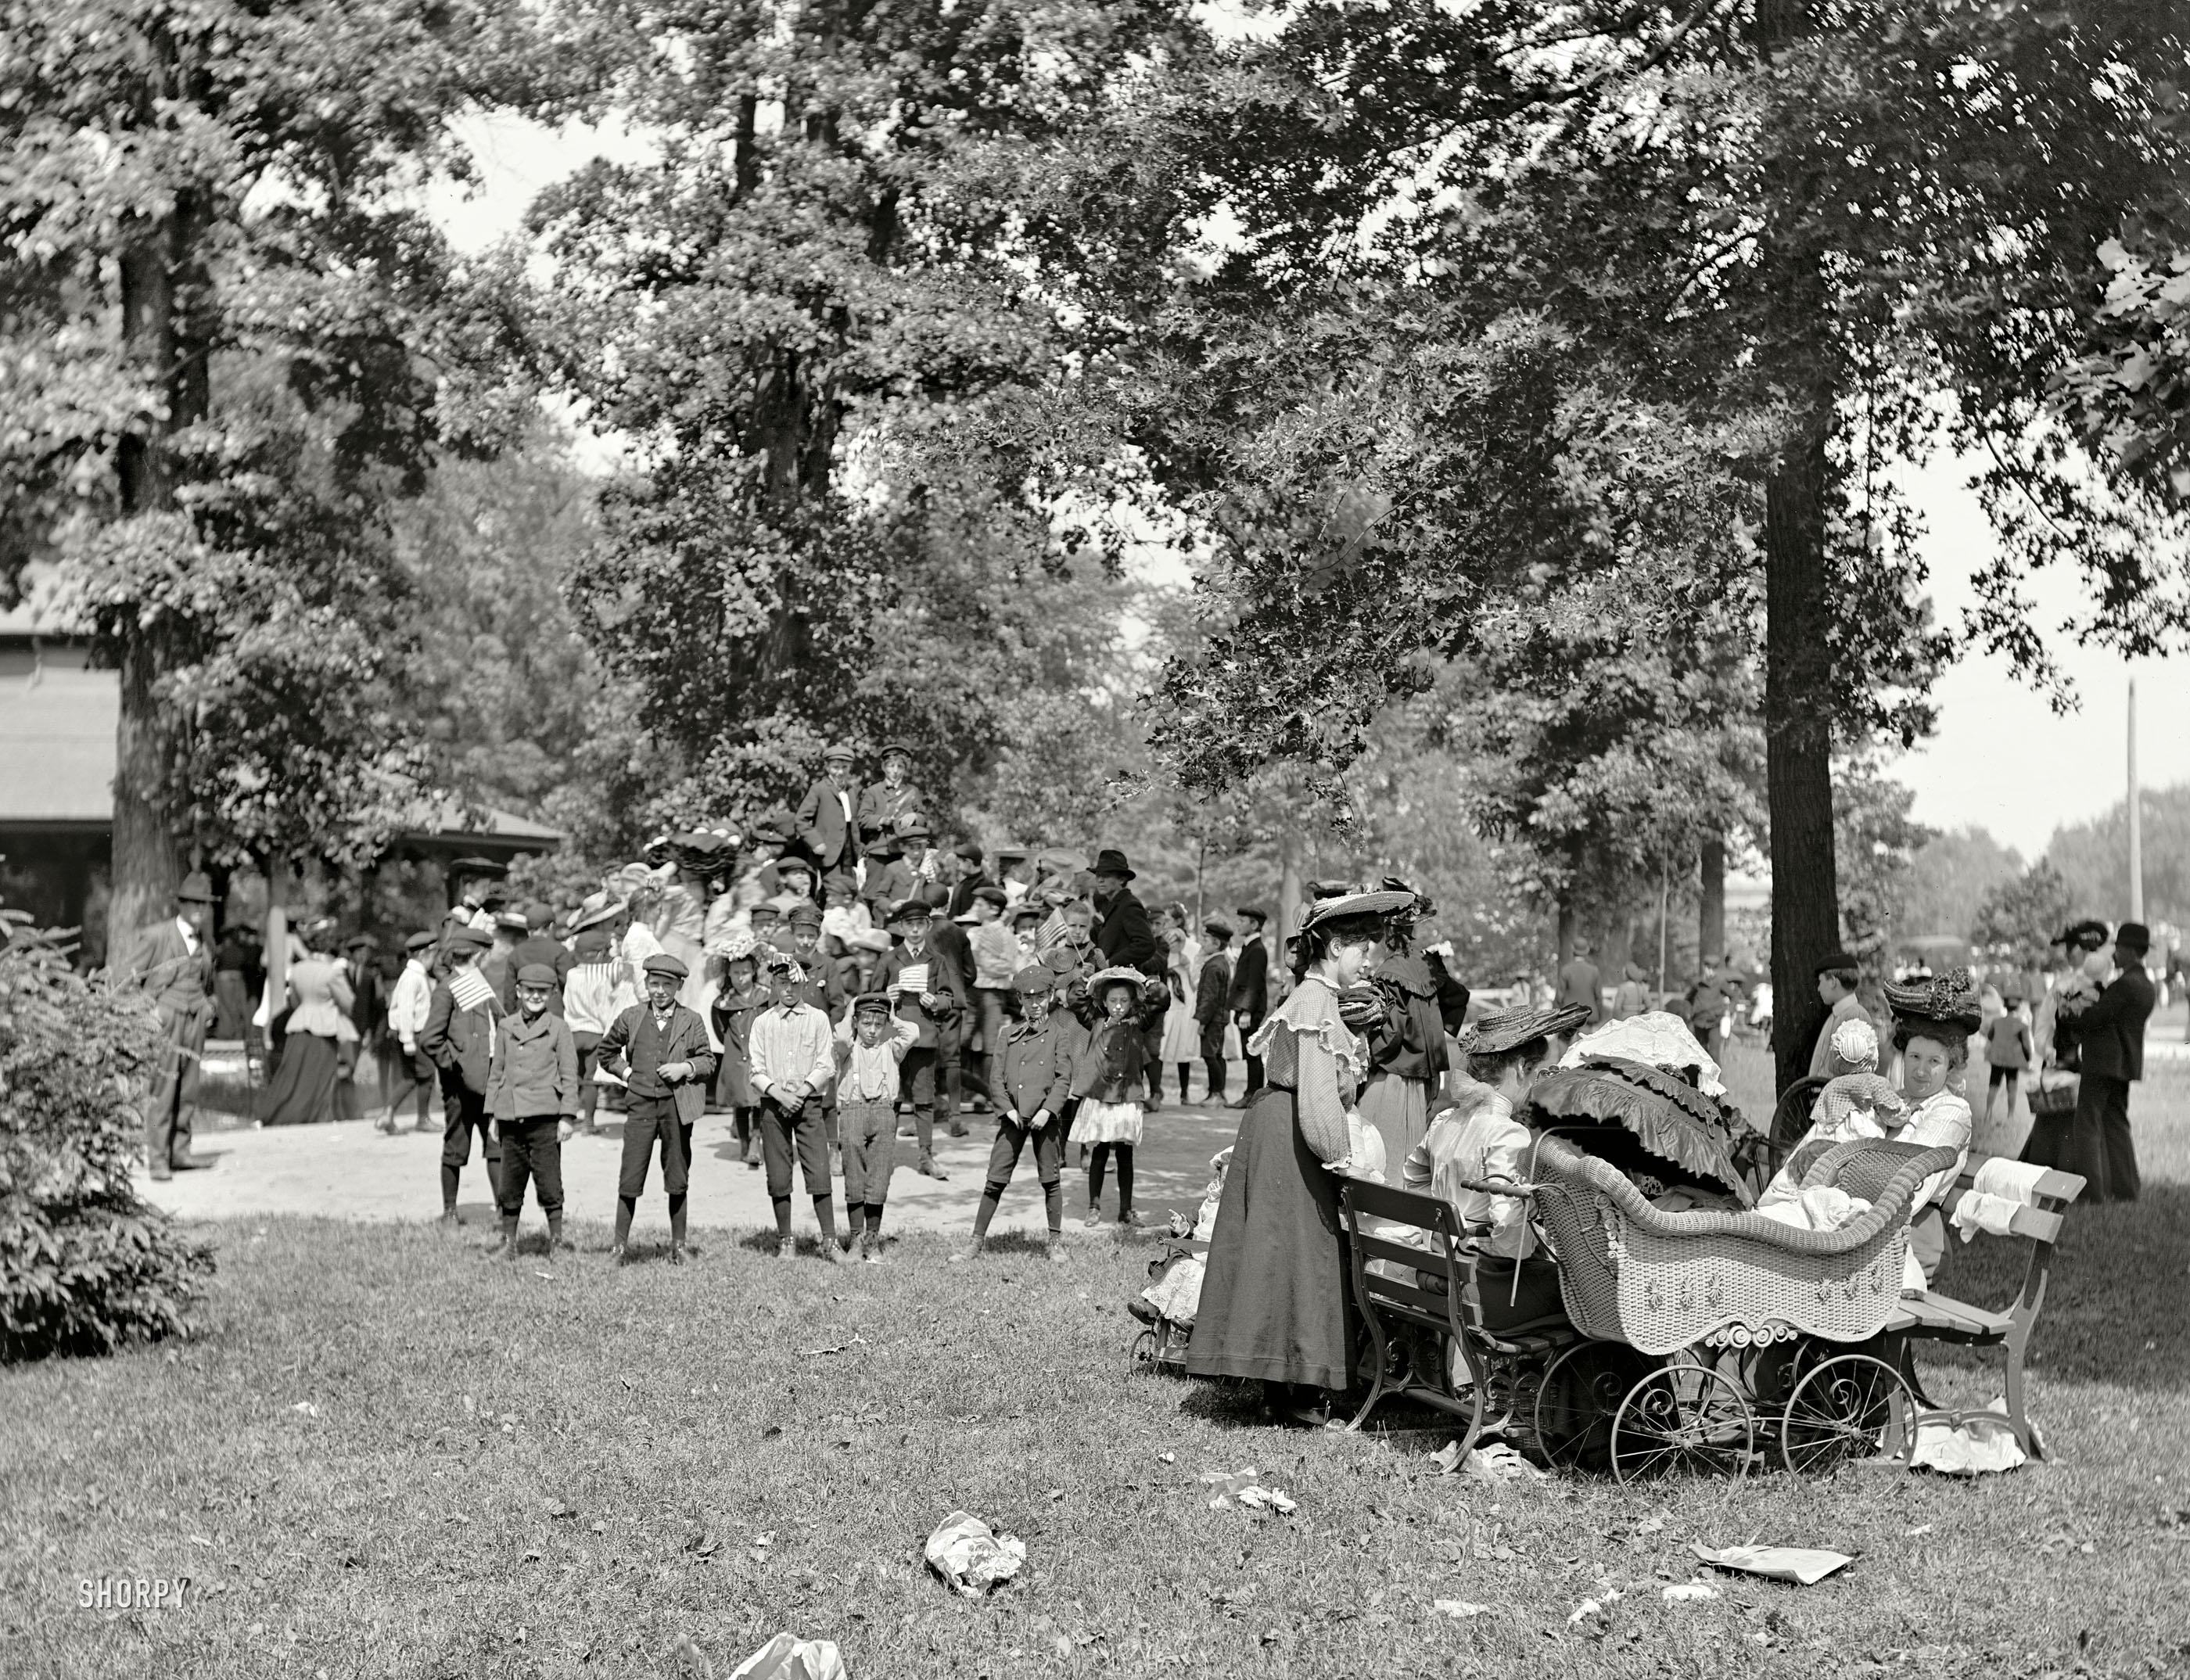 Detroit circa 1903. "Children's playground at Belle Isle Park." 8x10 inch dry plate glass negative, Detroit Publishing Company. View full size.